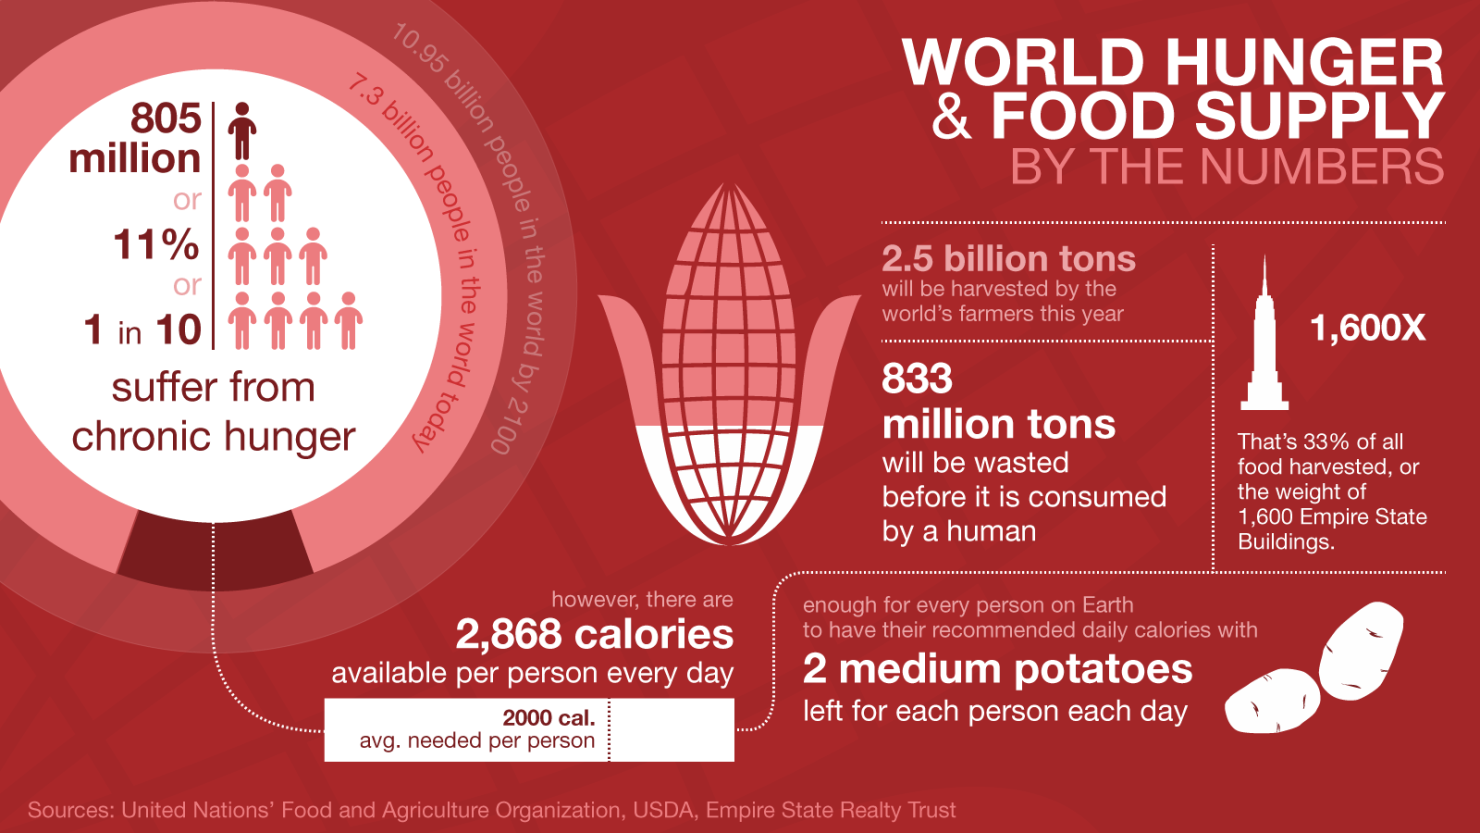 World Hunger by the Numbers